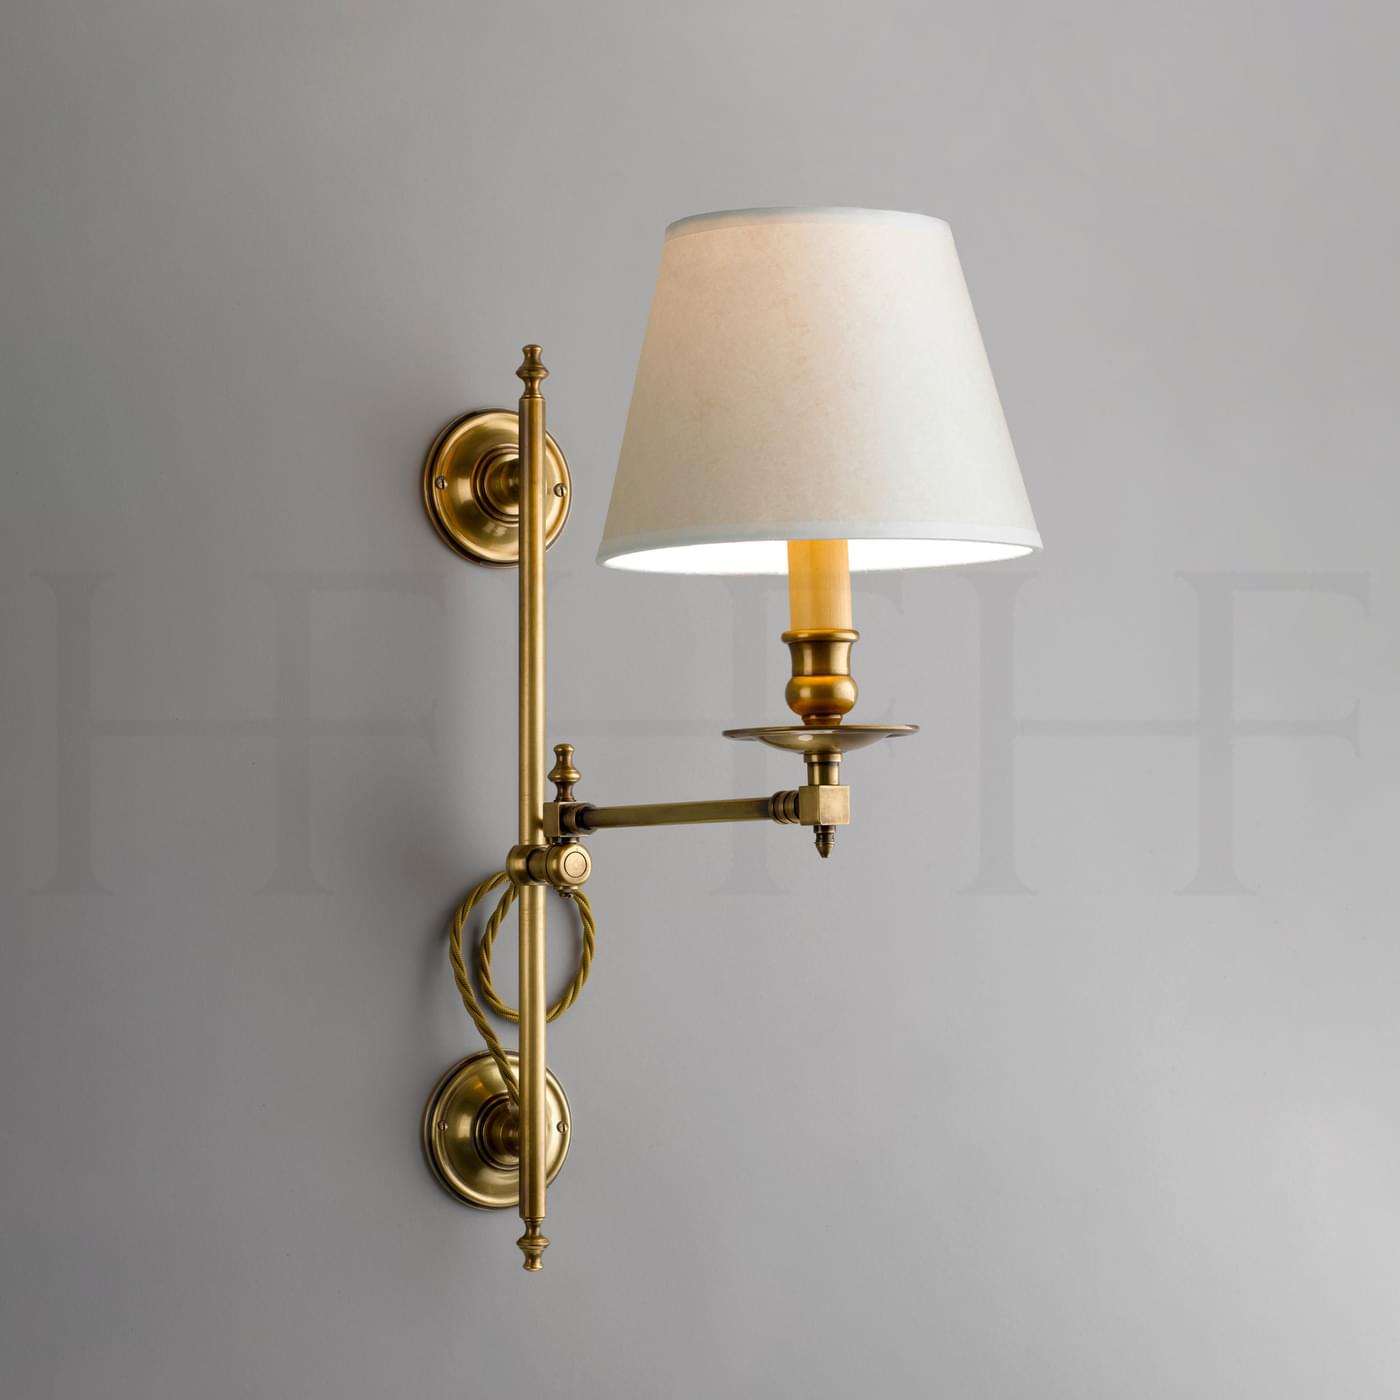 WL182 Hector Swing Arm Wall Light Vertically Adjustable L